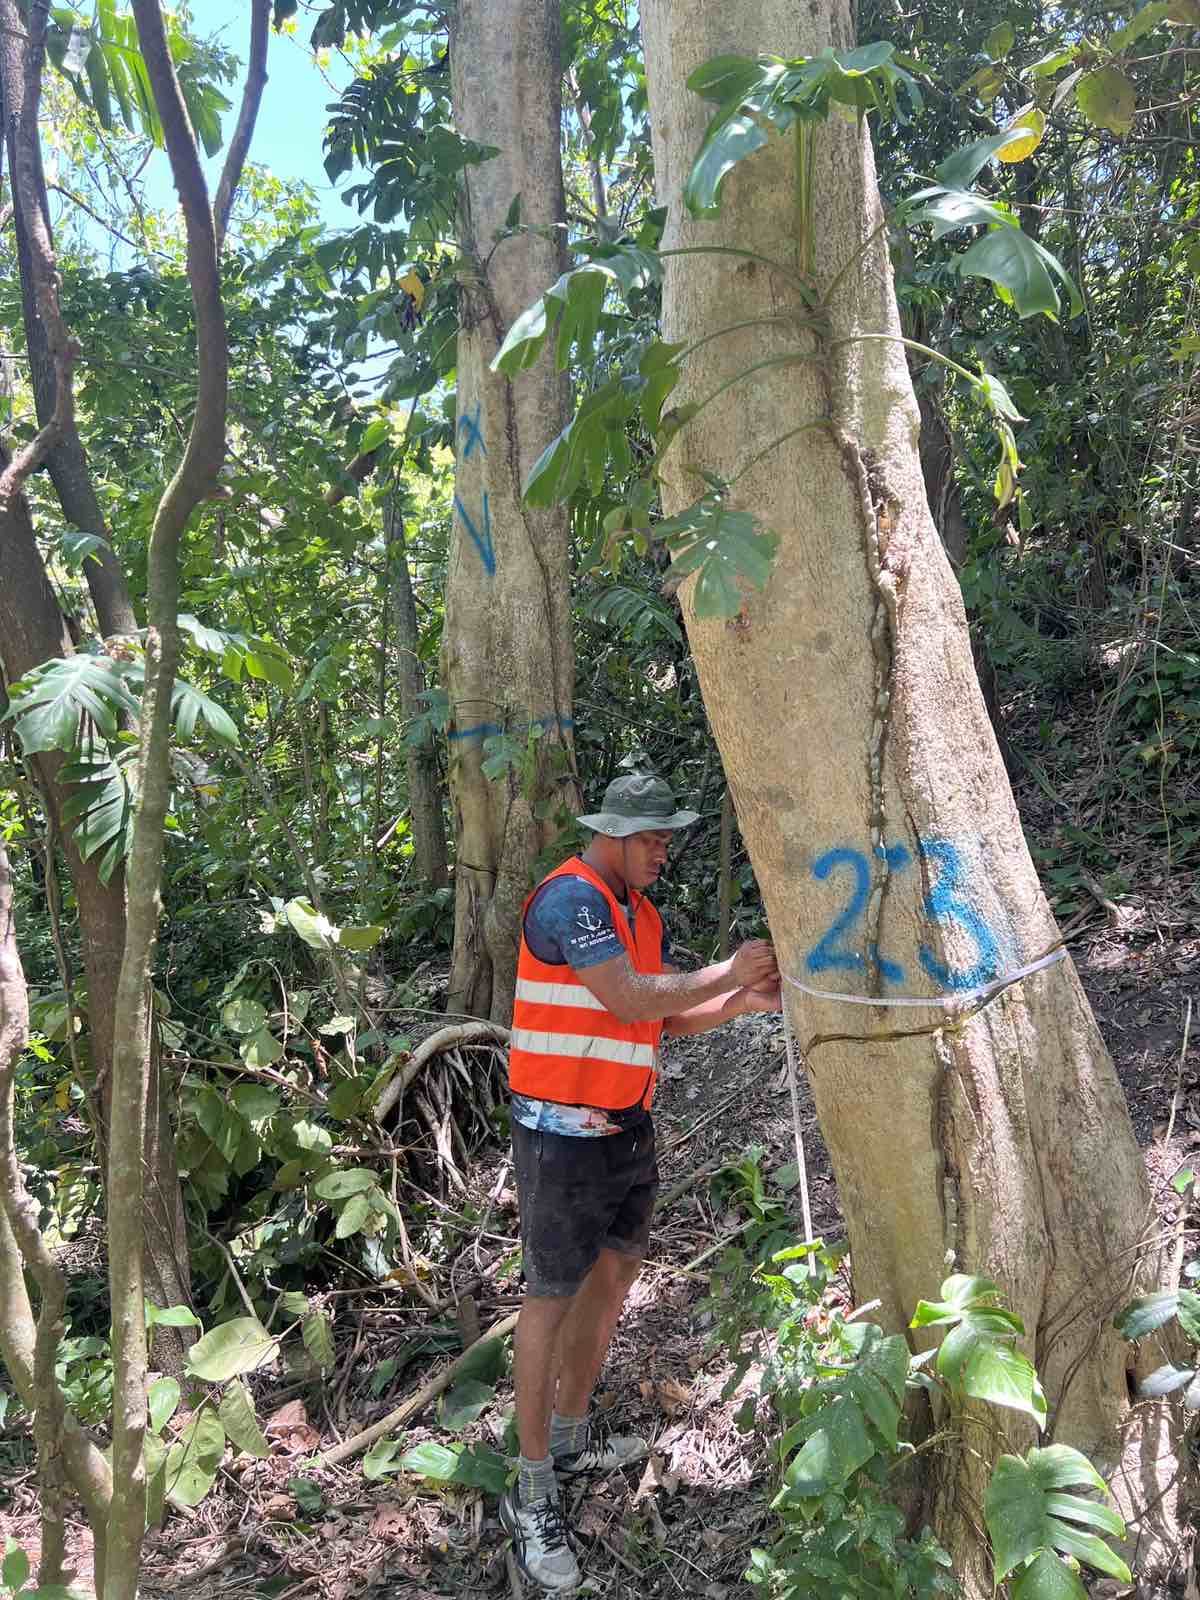 The Sigatoka Sand Dunes National Park rangers doing weed work for African tulip eradication at the site  on 12 - 15 December, 2023.